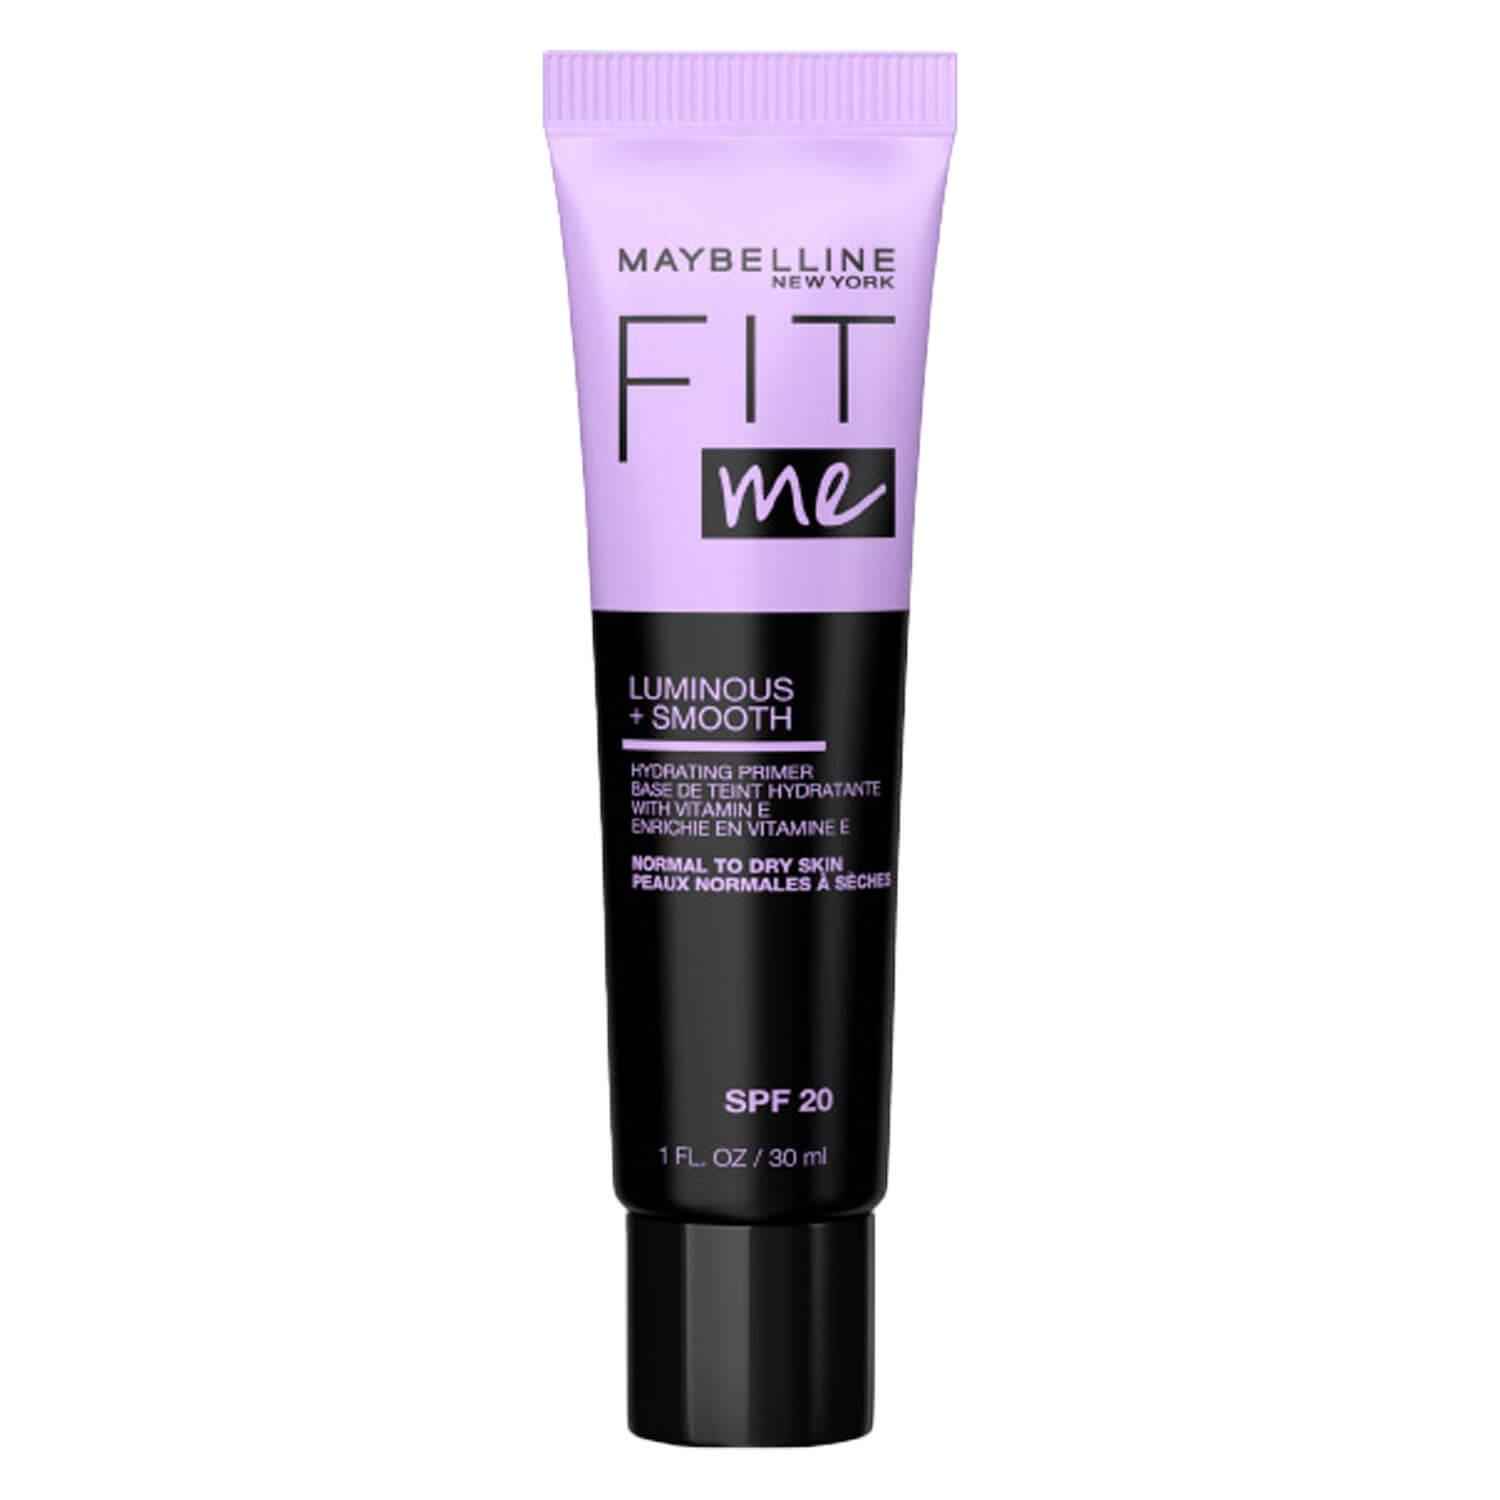 Maybelline NY Primer - Fit Me Primer Luminous & Smooth